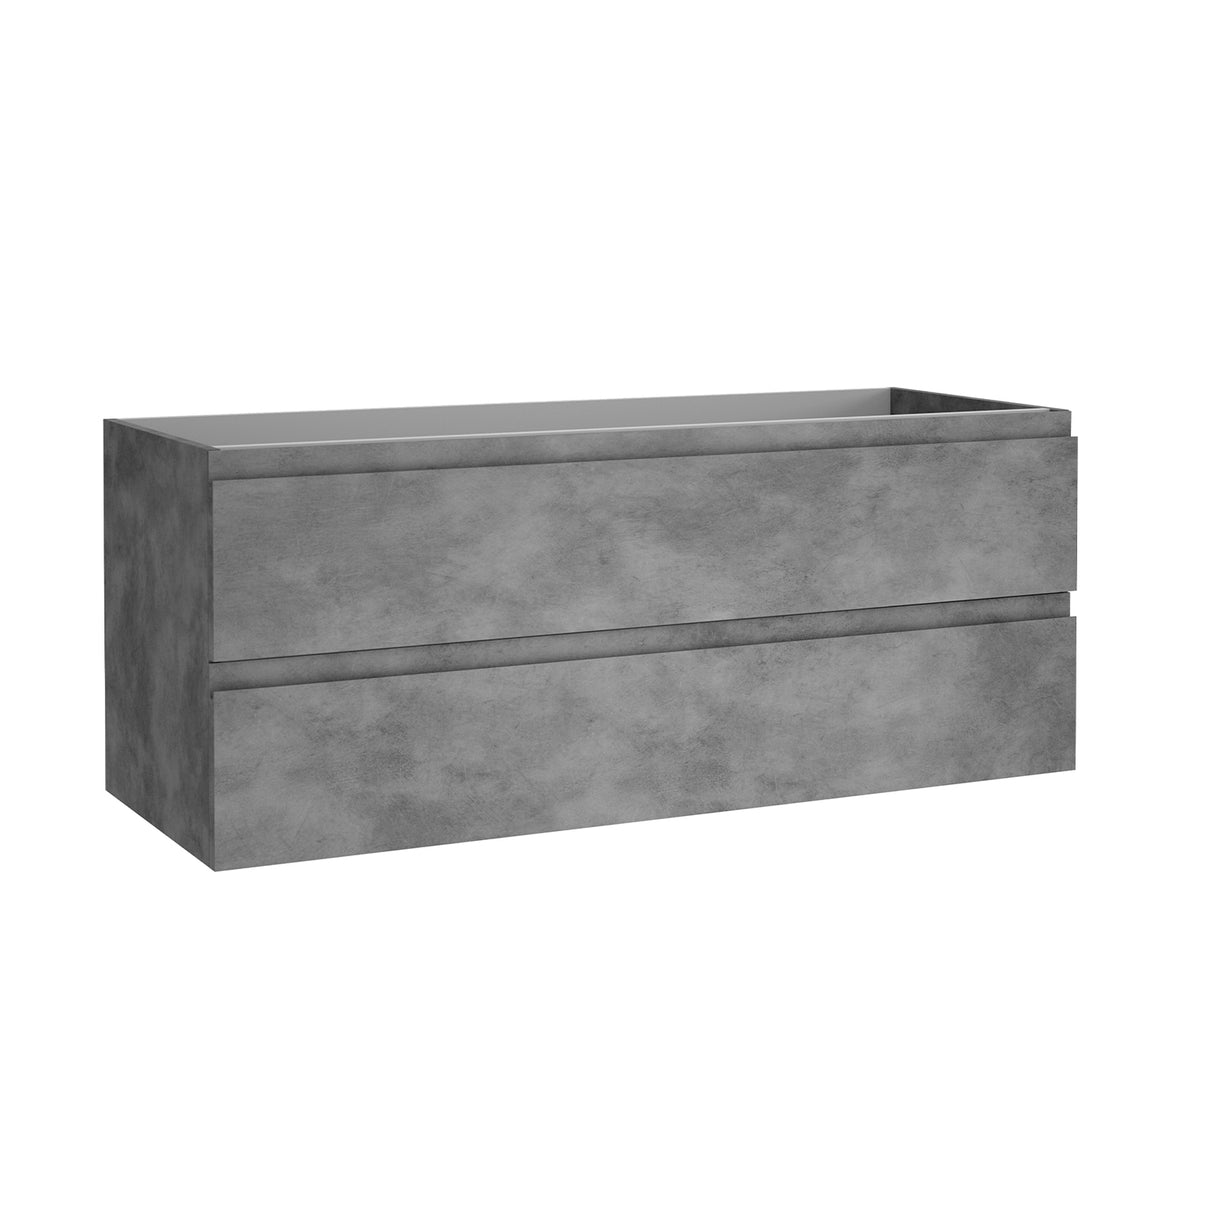 DAX Pasadena Vanity Single Cabinet with Onix Basin, 48", Cement DAX-PAS014881-ONX